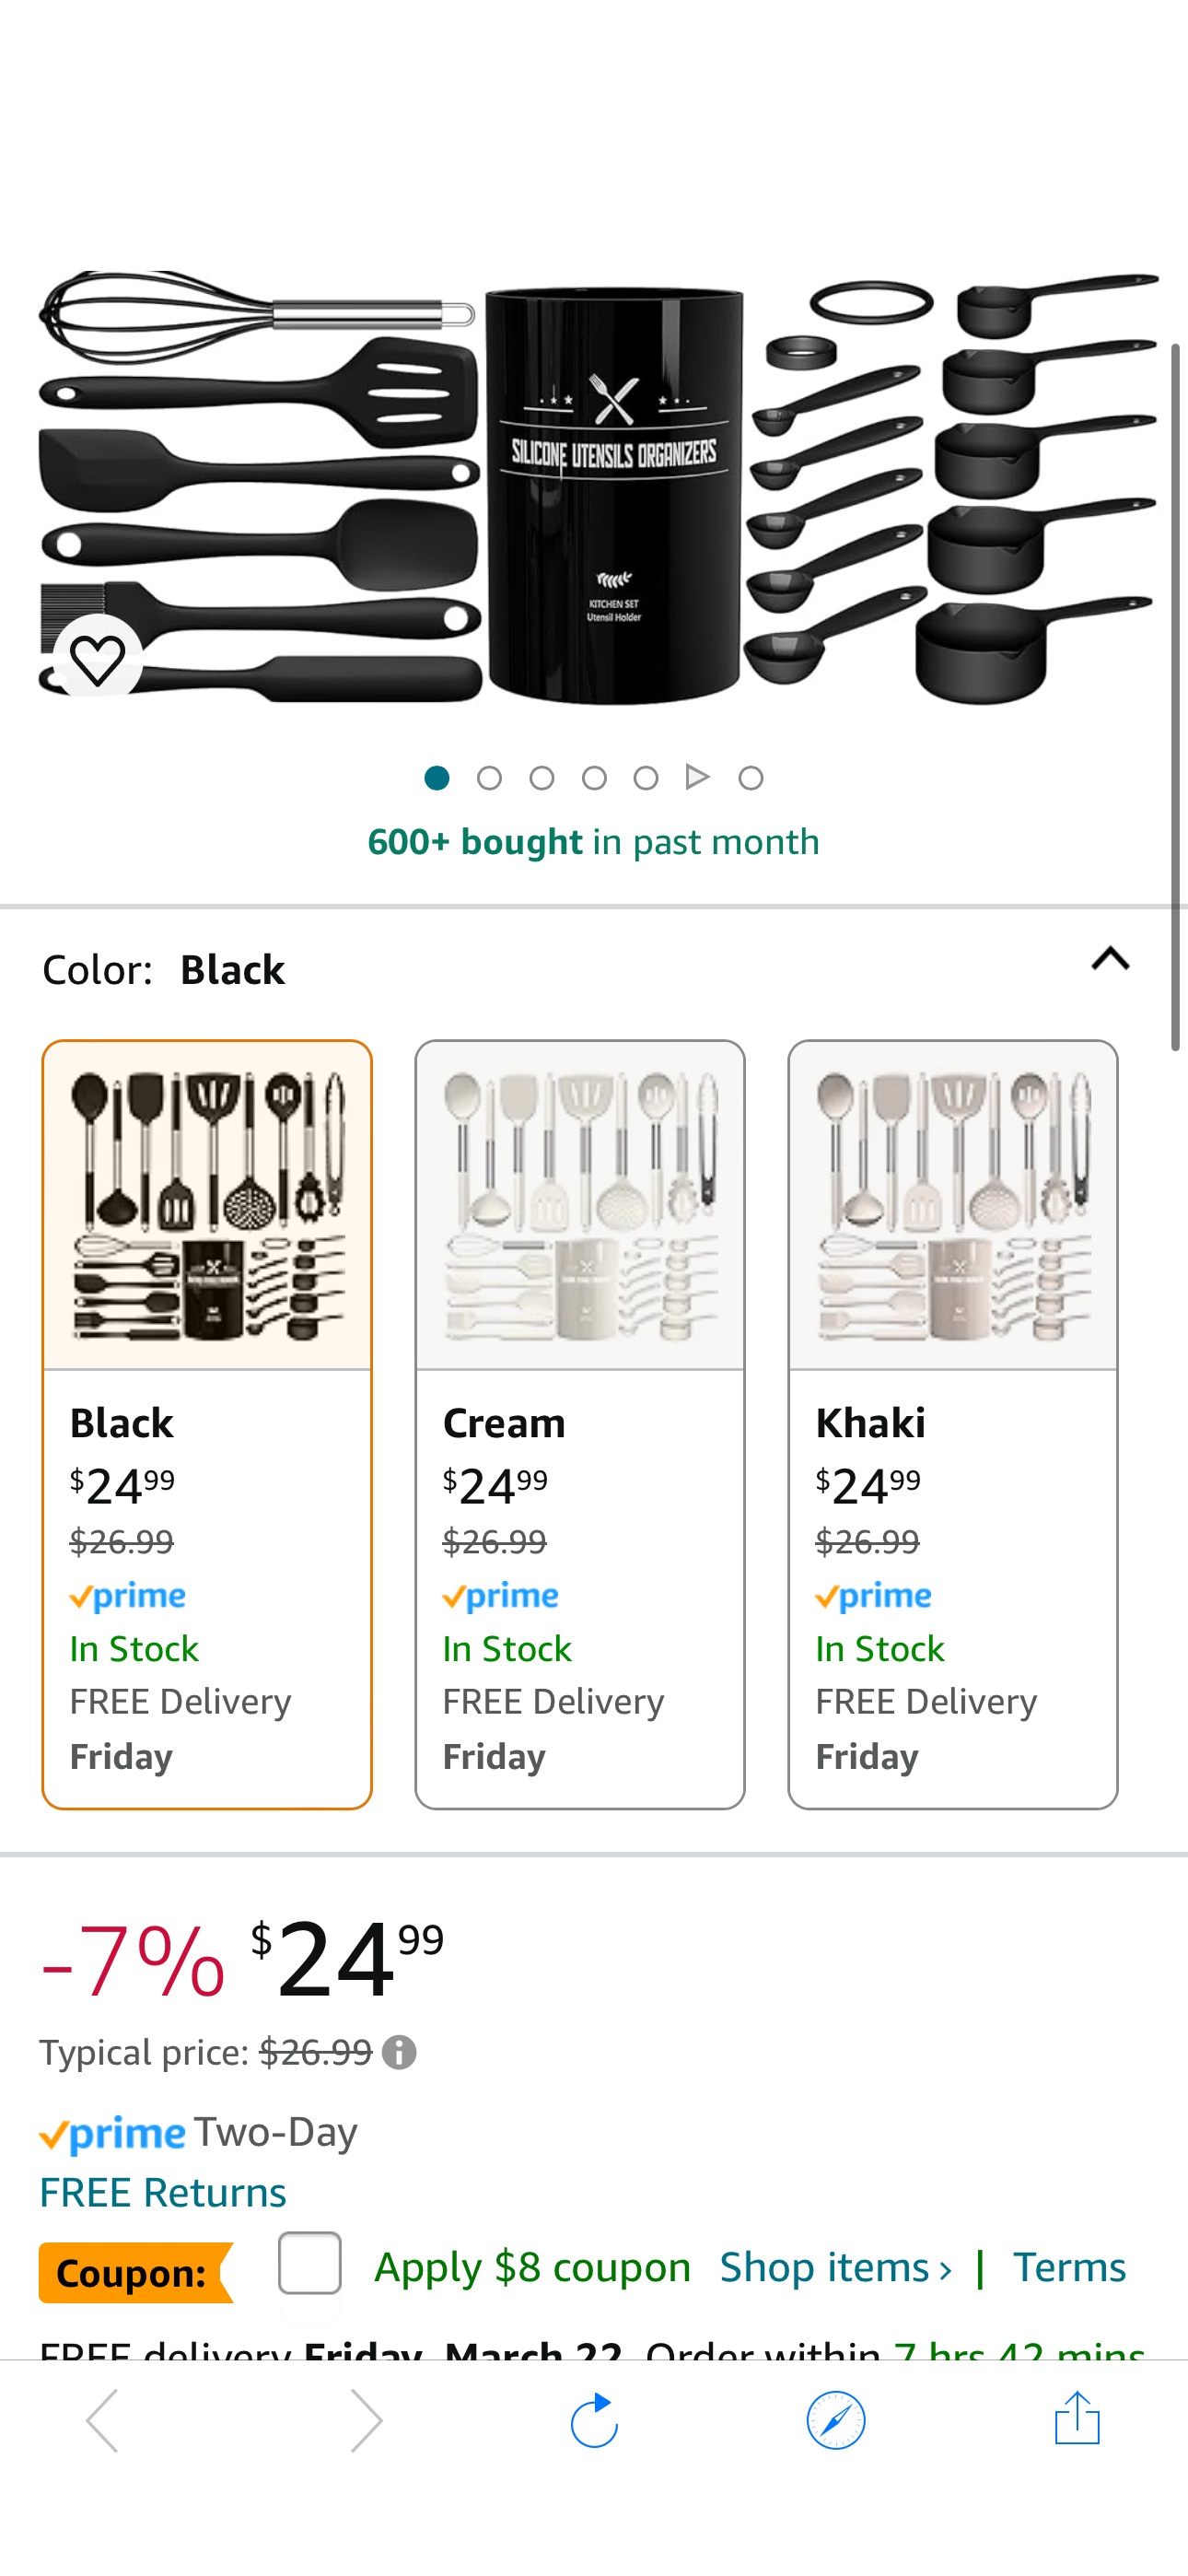 Amazon.com: Silicone Kitchen Utensils Set, Umite Chef Large Heat Resistant Cooking Utensil, 26Pcs Silicone Spatulas Set, Stainless Steel Handle coupon